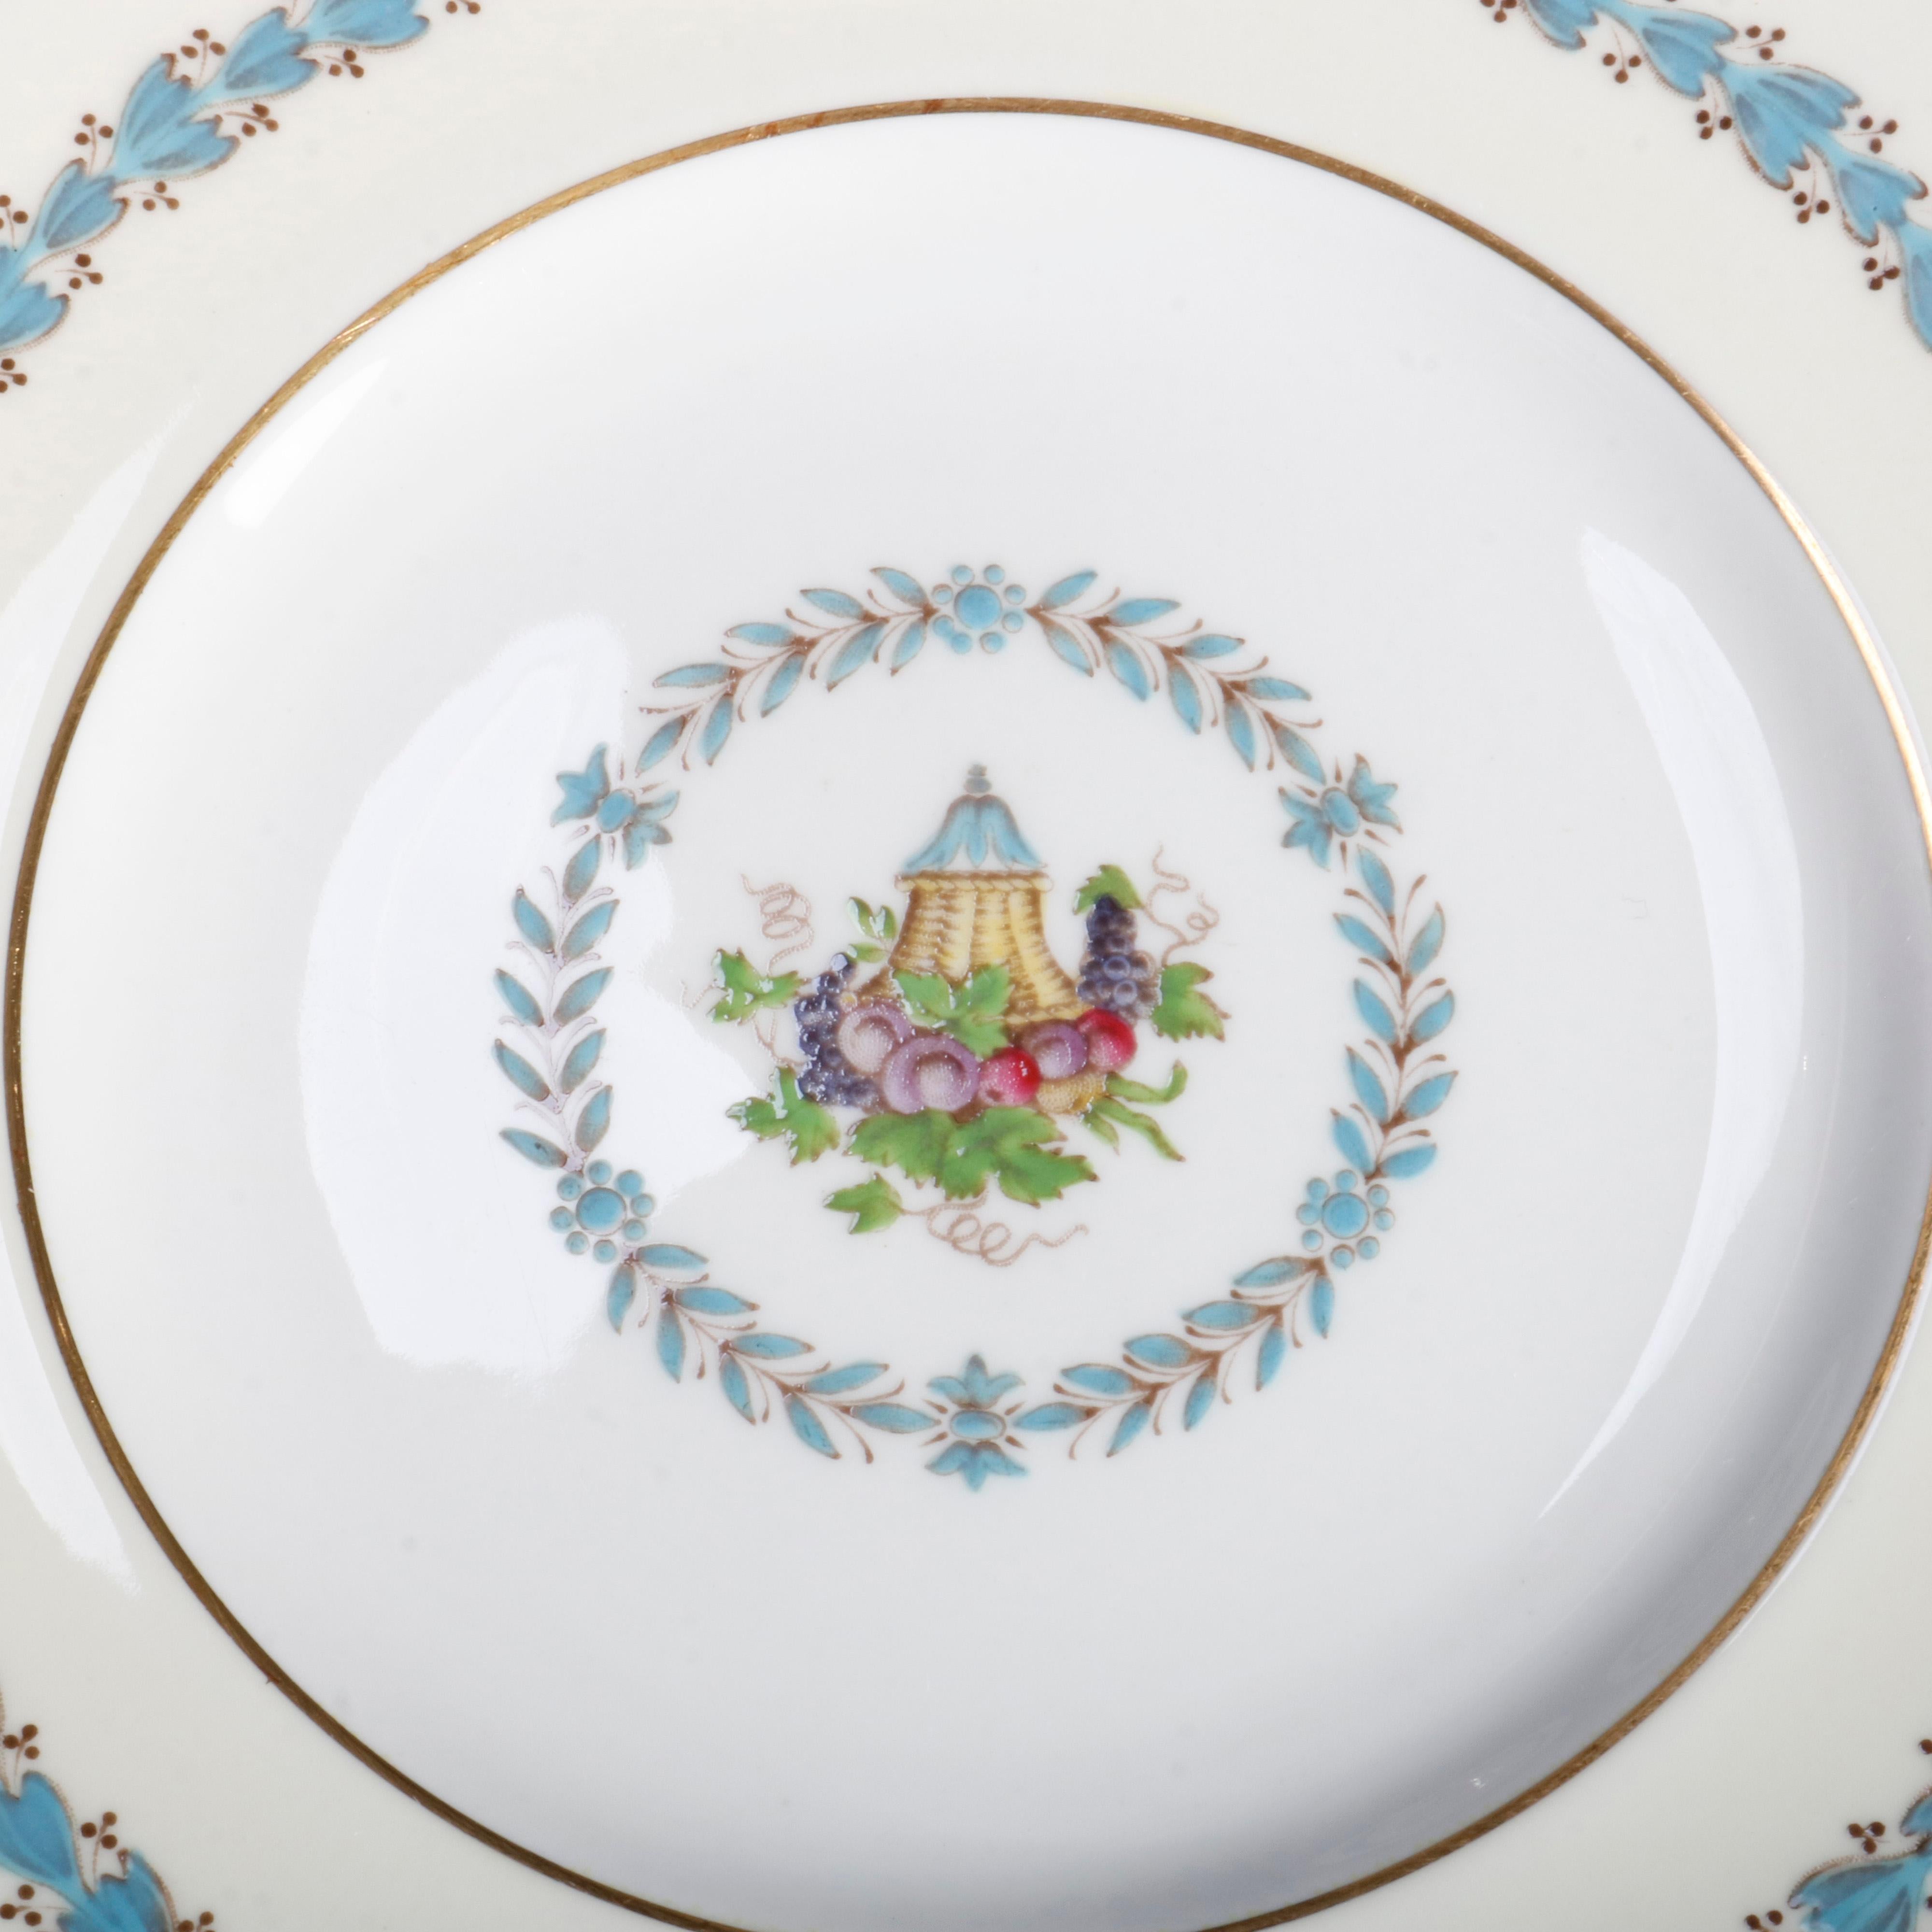 A set of 12 Wedgwood Appledore fine bone China salad plates offer central fruit basket with laurel wreath border, rim with inverted bellflowers, gilt highlights throughout, en verso maker mark as photographed, pattern W3257, 20th century.
Full set